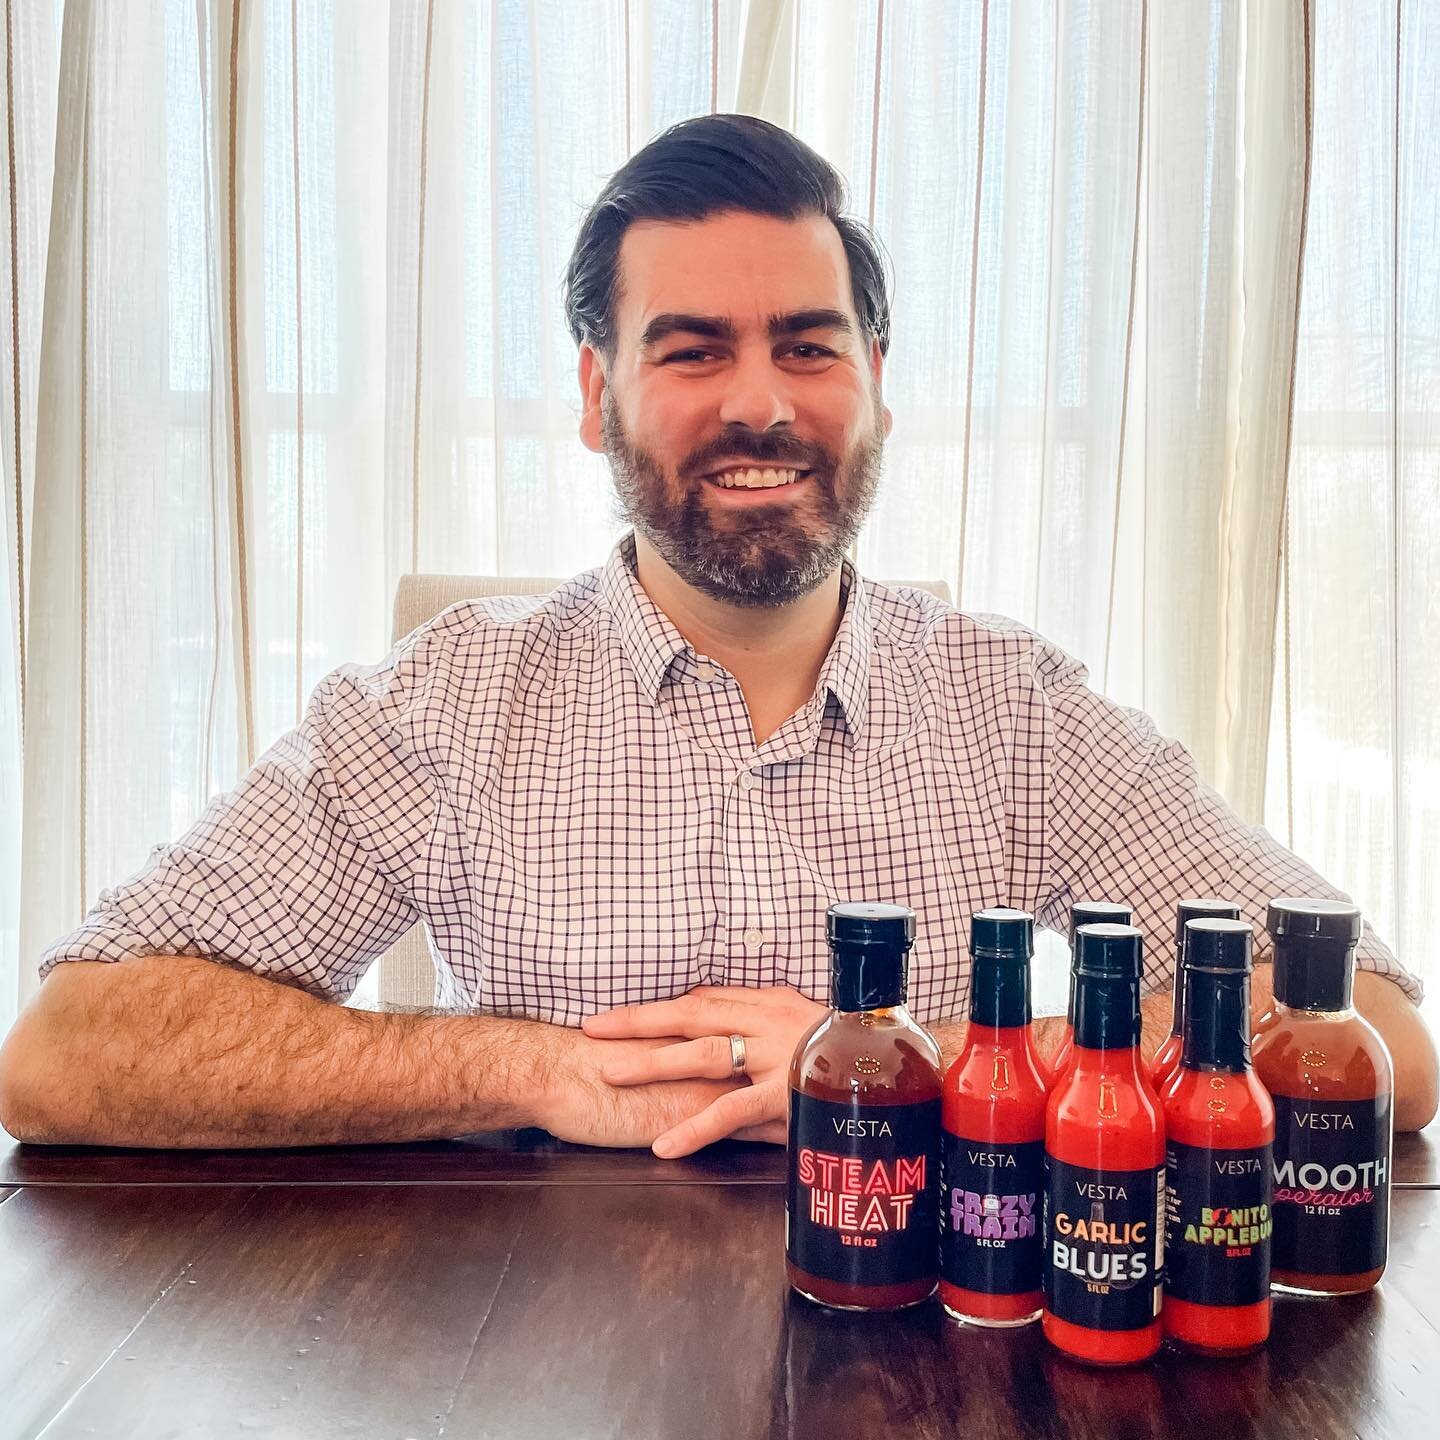 Order 2 or more sauces and this smiling face (behind a mask 😷) will deliver right to your front door this weekend!
.
.
#delivery #shoplocal #sauce #supportsmallbusiness #vestabbq #supportlocal #restaurantchallenge